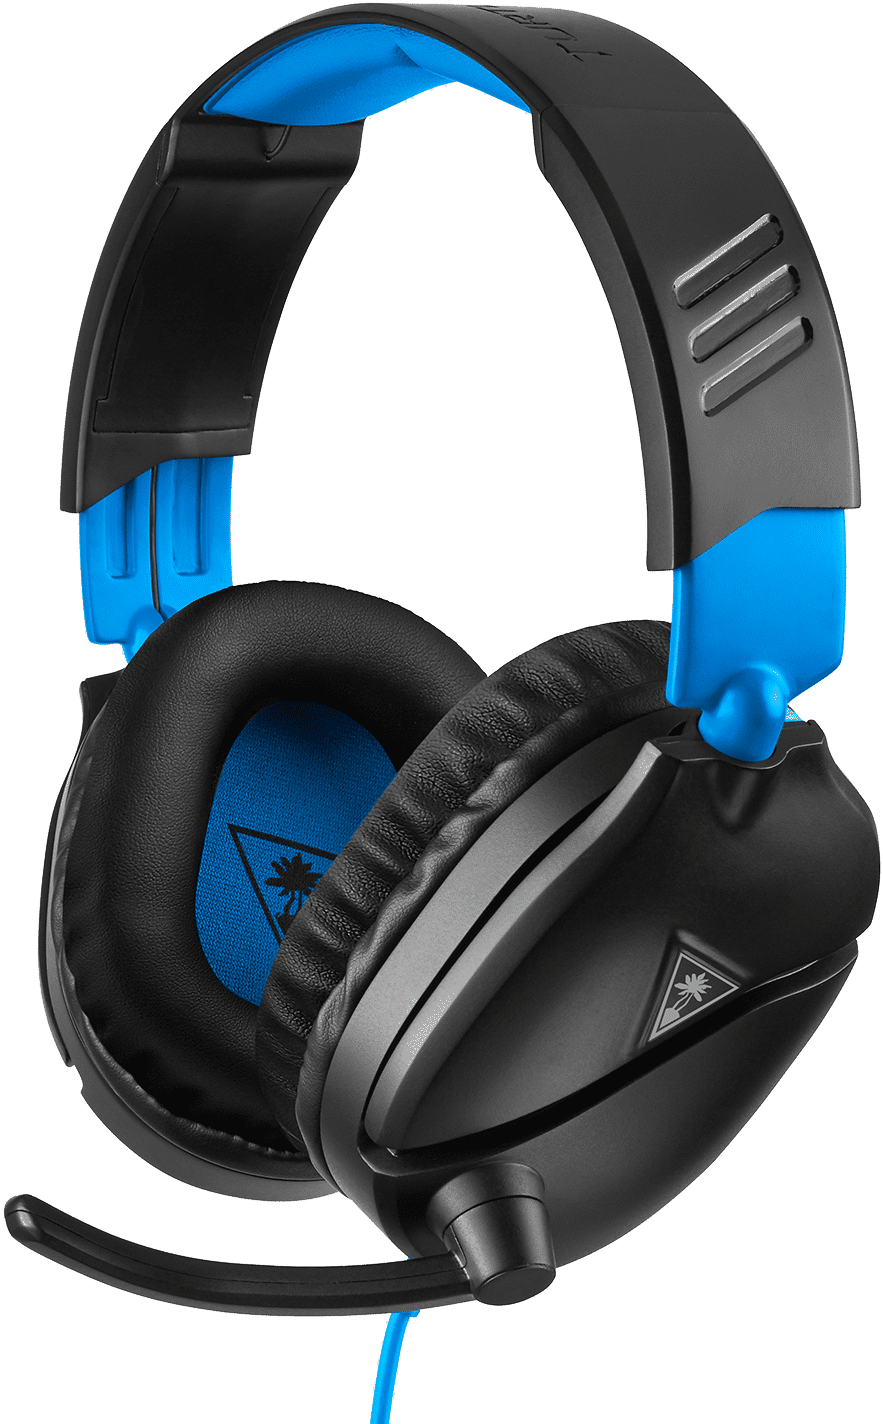 turtle-beach-recon-70p-gaming-headset-voor-ps5-ps4-xbox-switch-pc-zwart